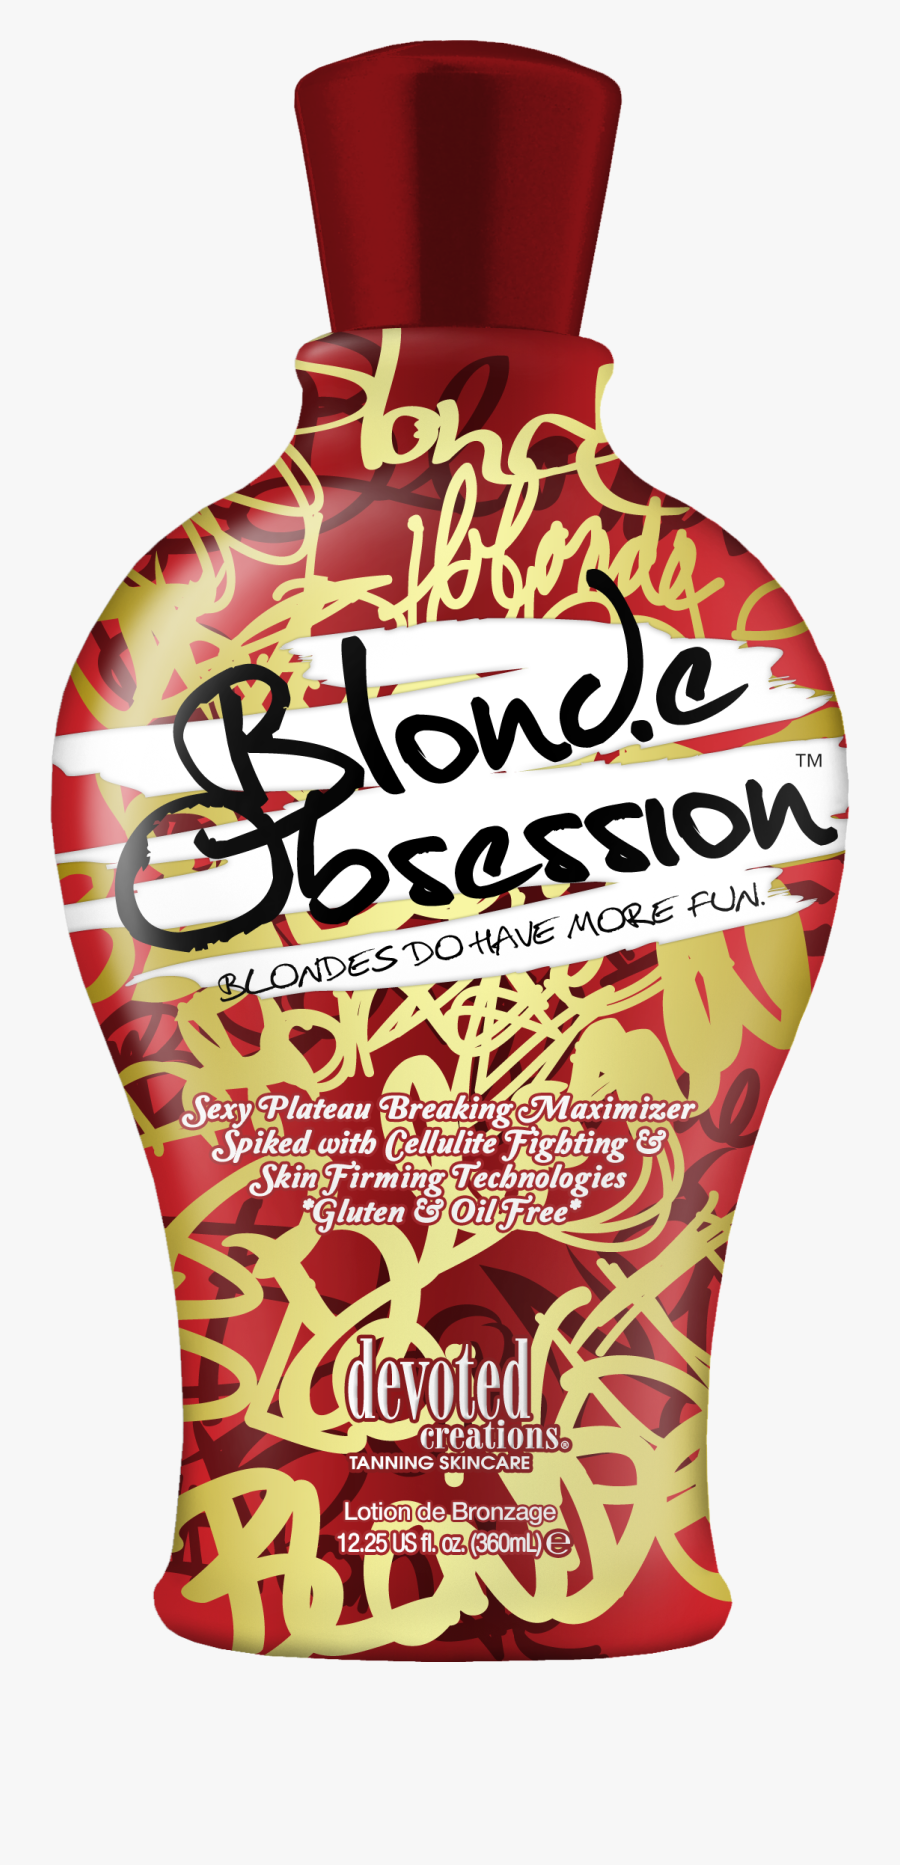 Blonde Obsession™ - Blonde Obsession, Transparent Clipart